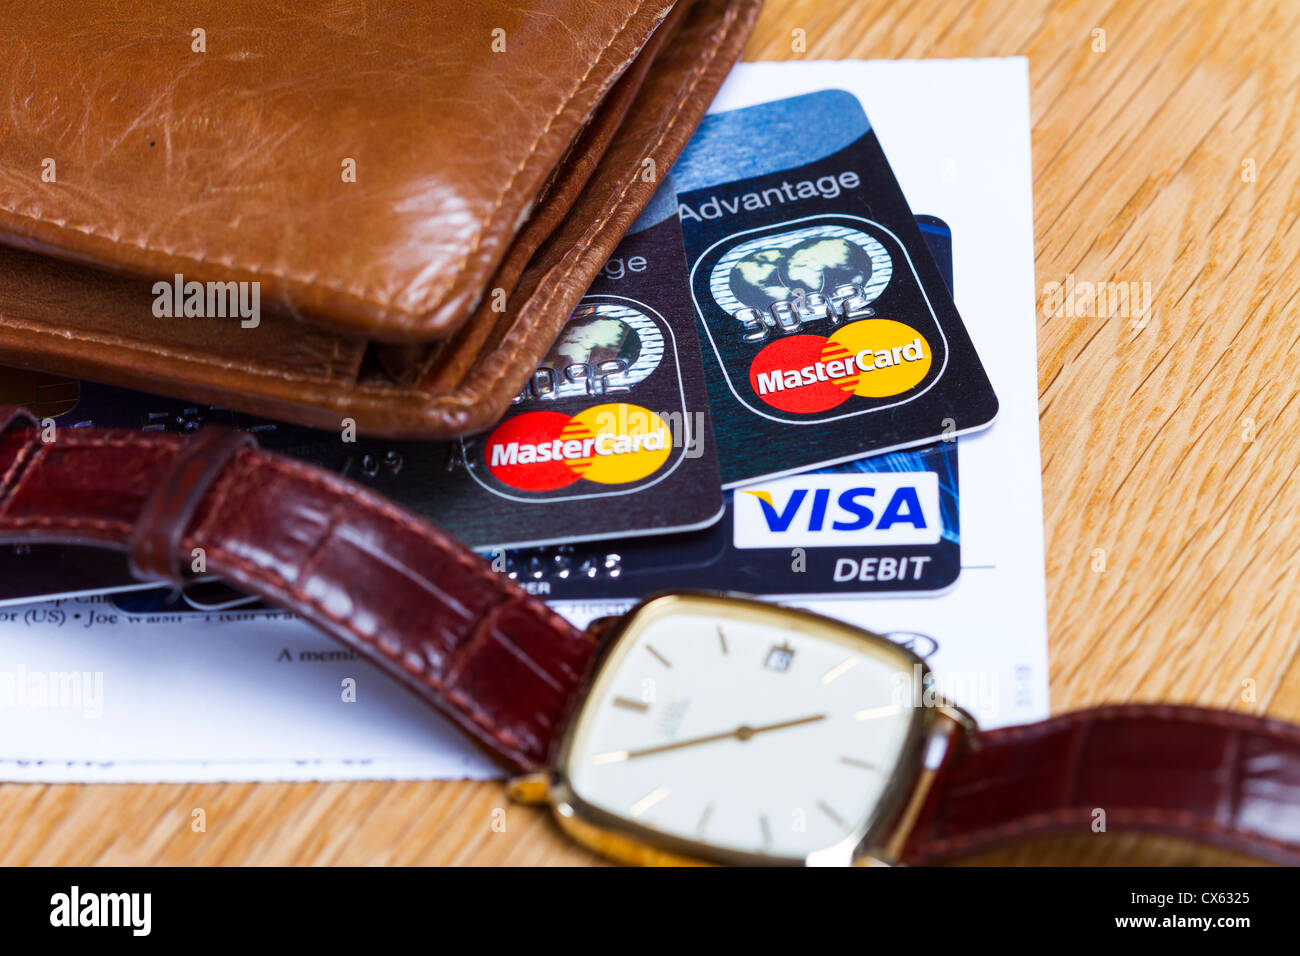 Mastercard & Visa Debit card along with a wallet and a watch Stock Photo